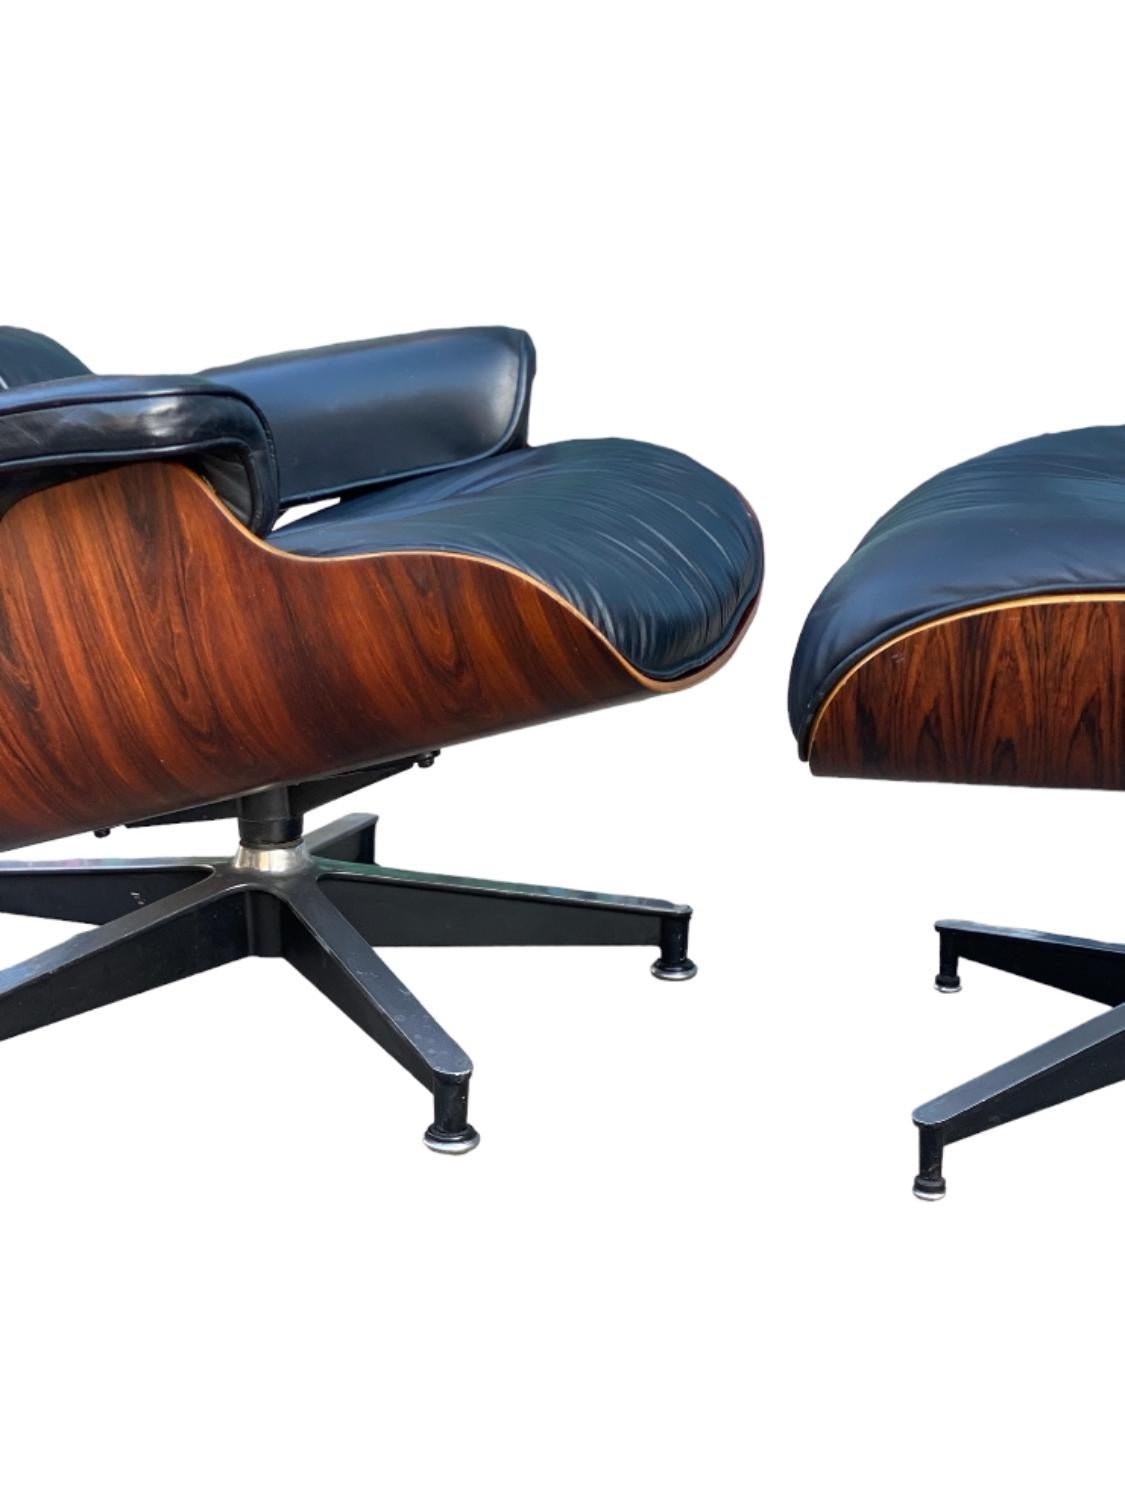 Vintage Restored Herman Miller Eames Lounge Chair and Ottoman 1